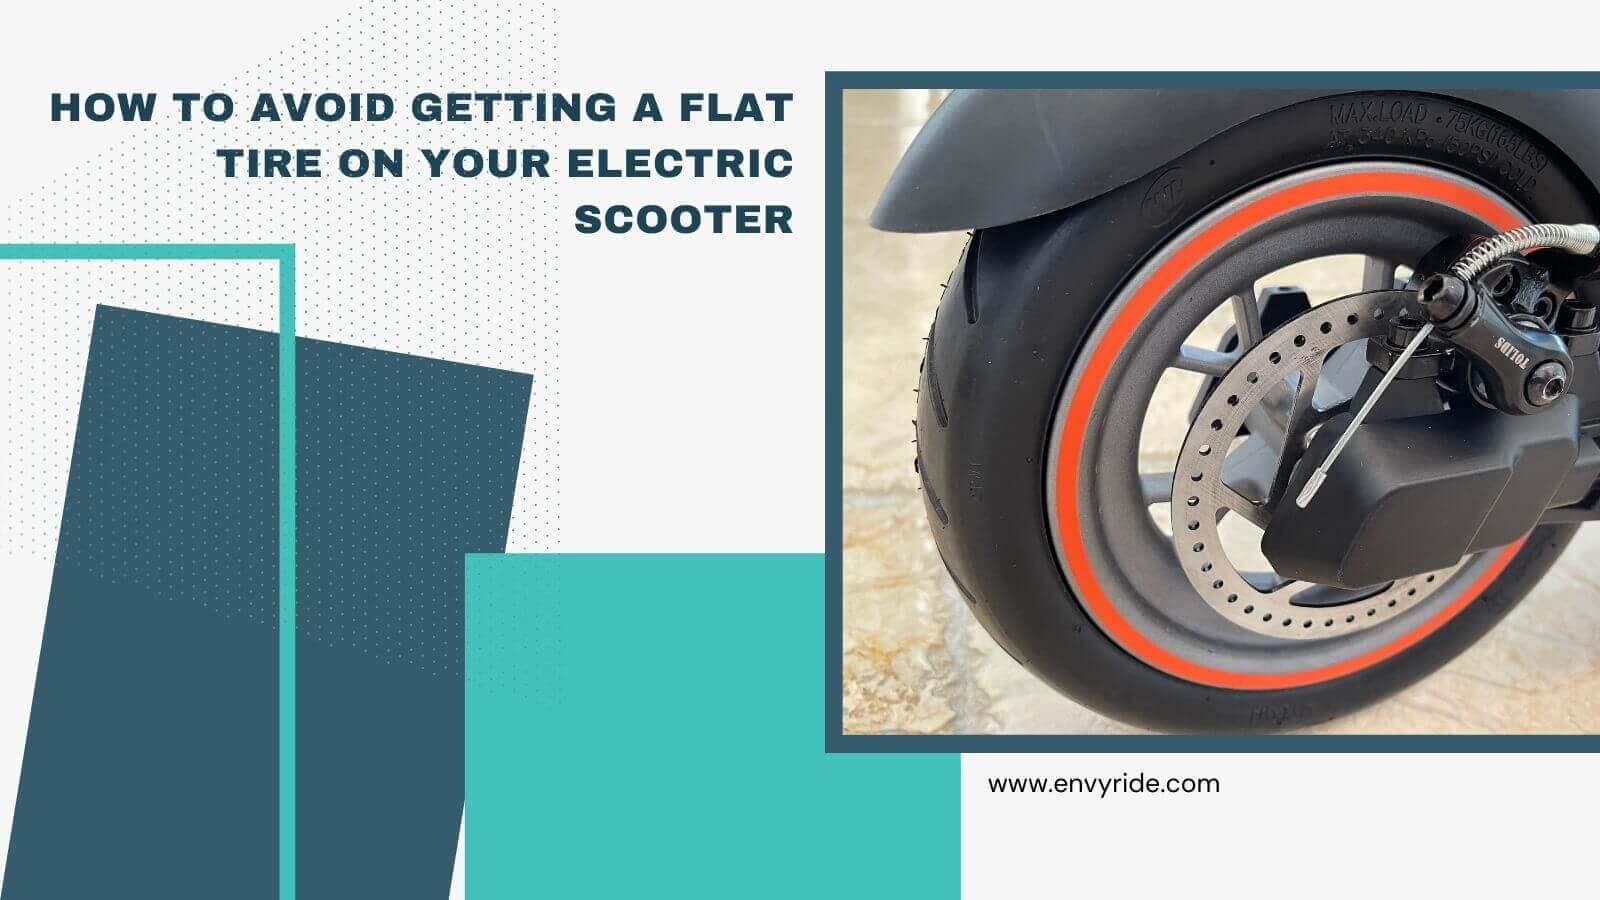 Avoid Flat Tires on your electric scooter